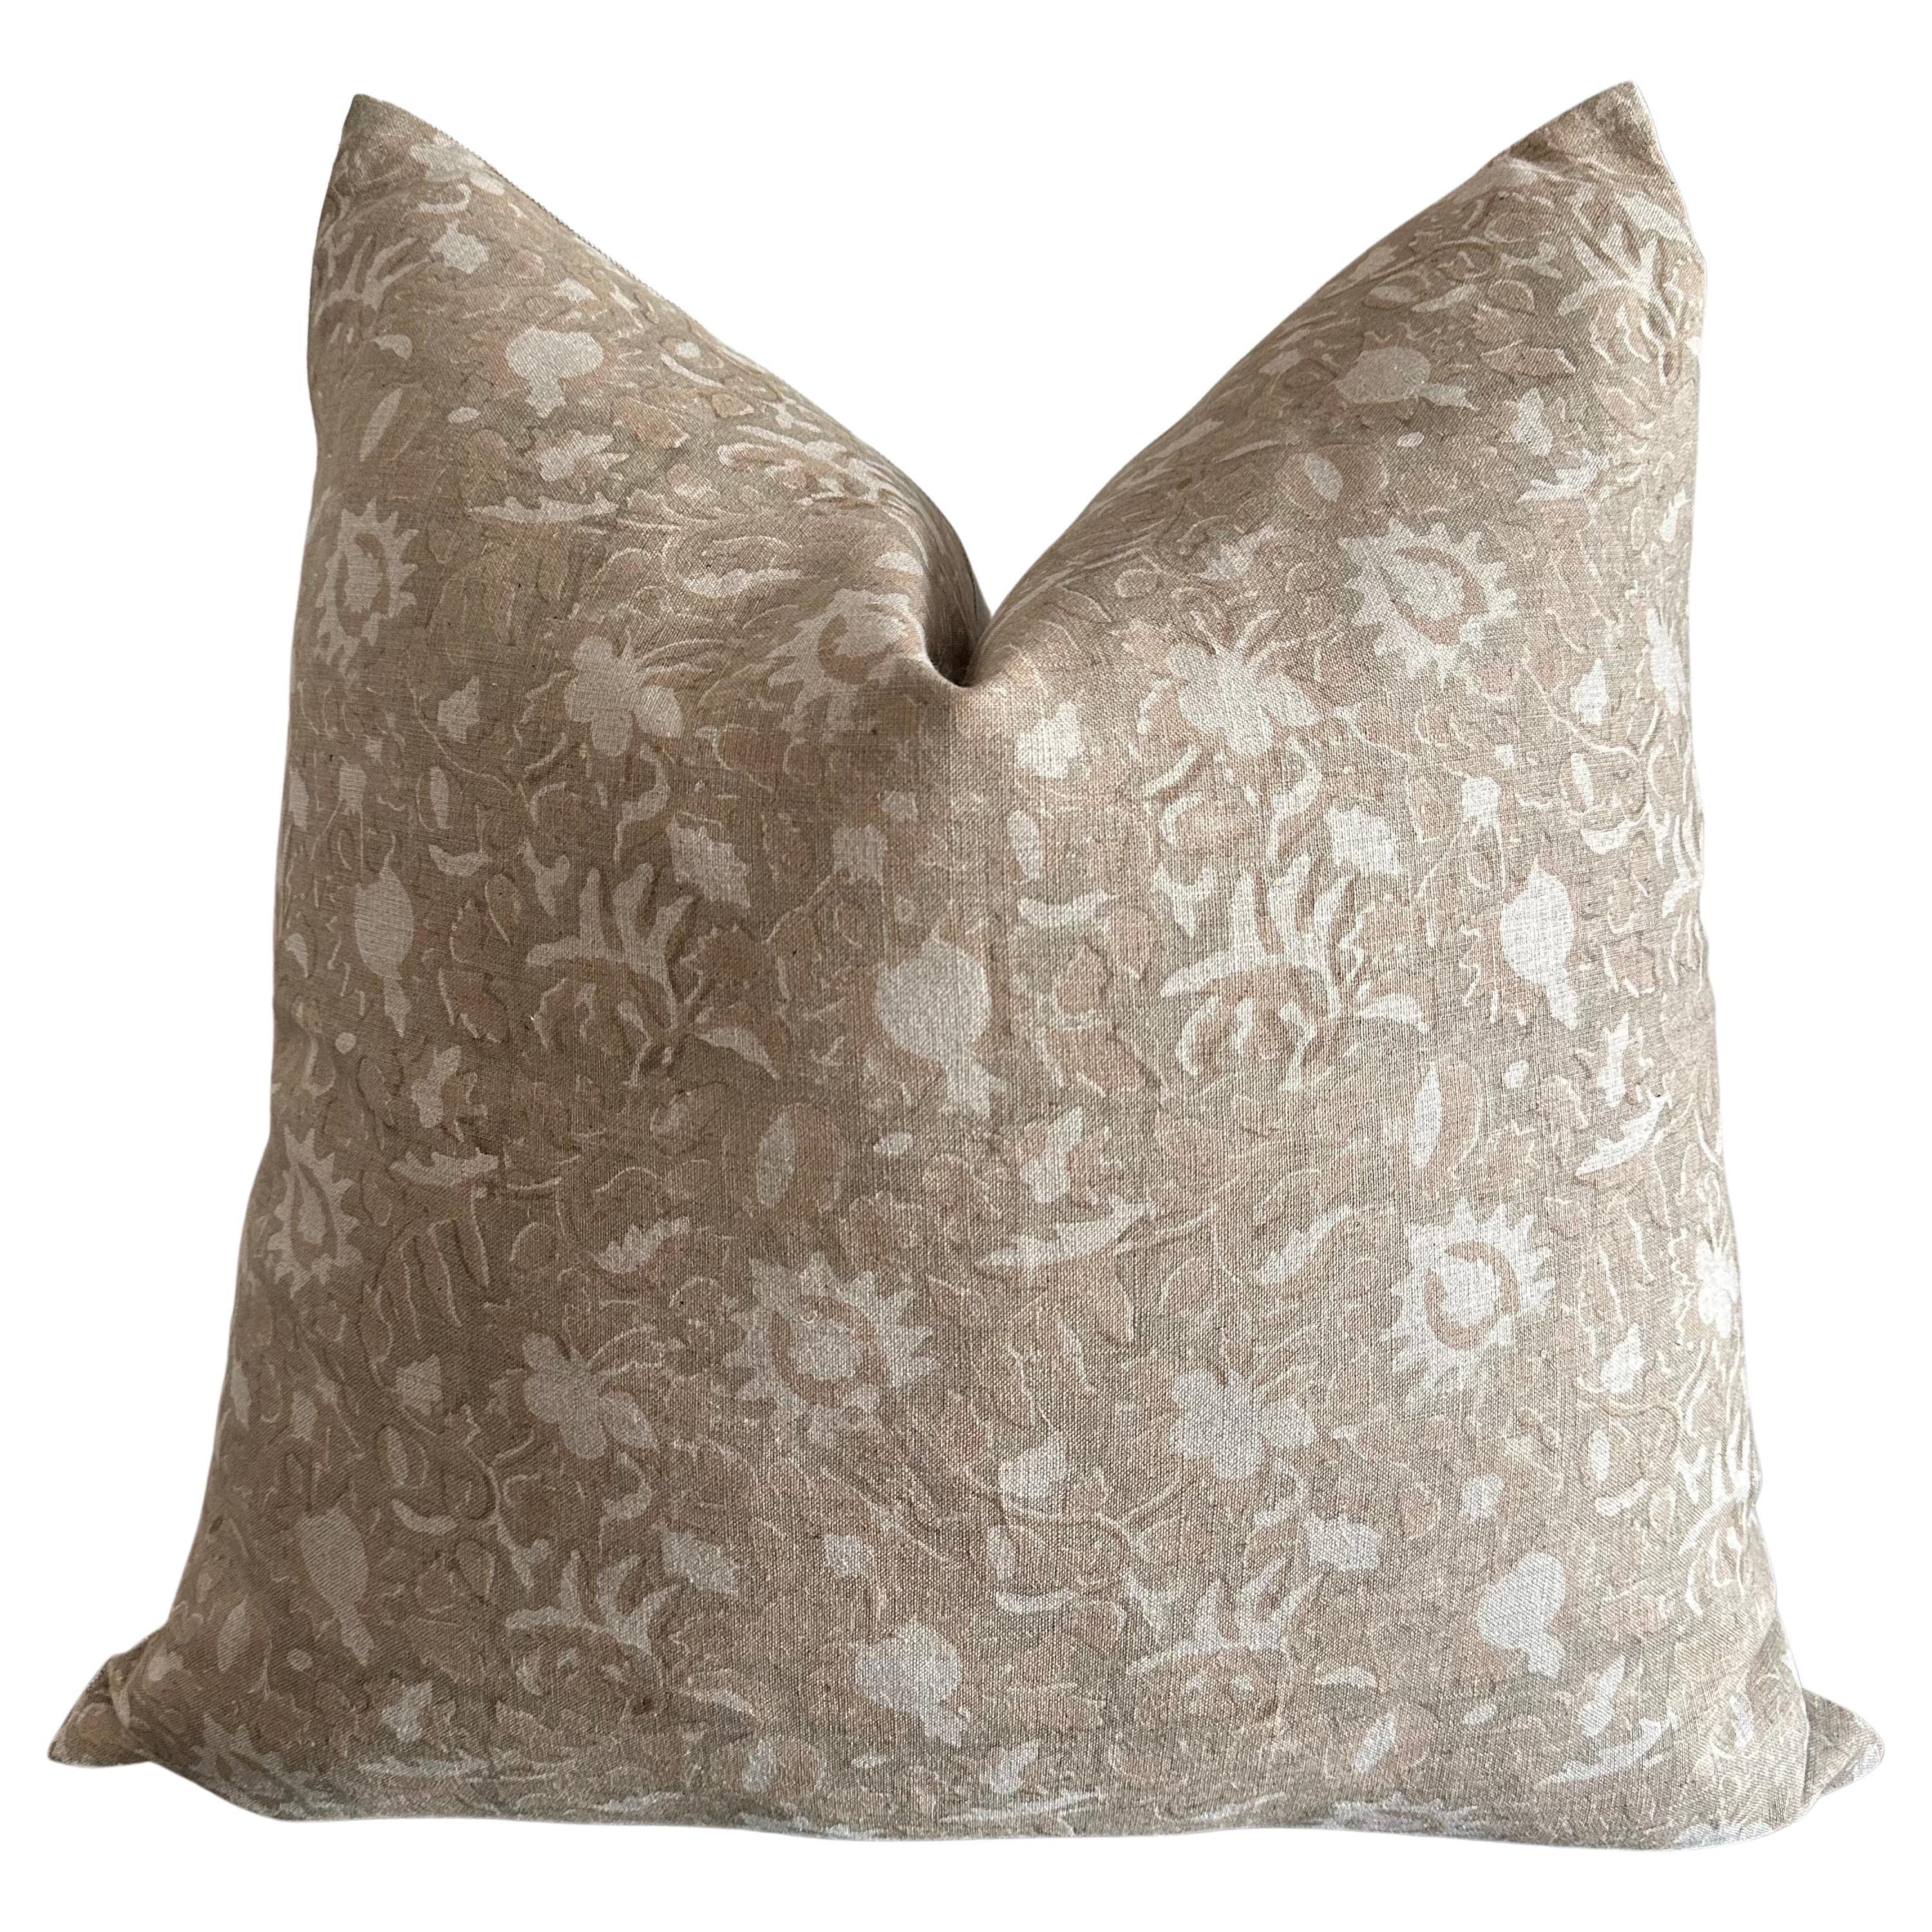 Sausalito Floral Block Printed Linen Pillow with Down Feather Insert For Sale